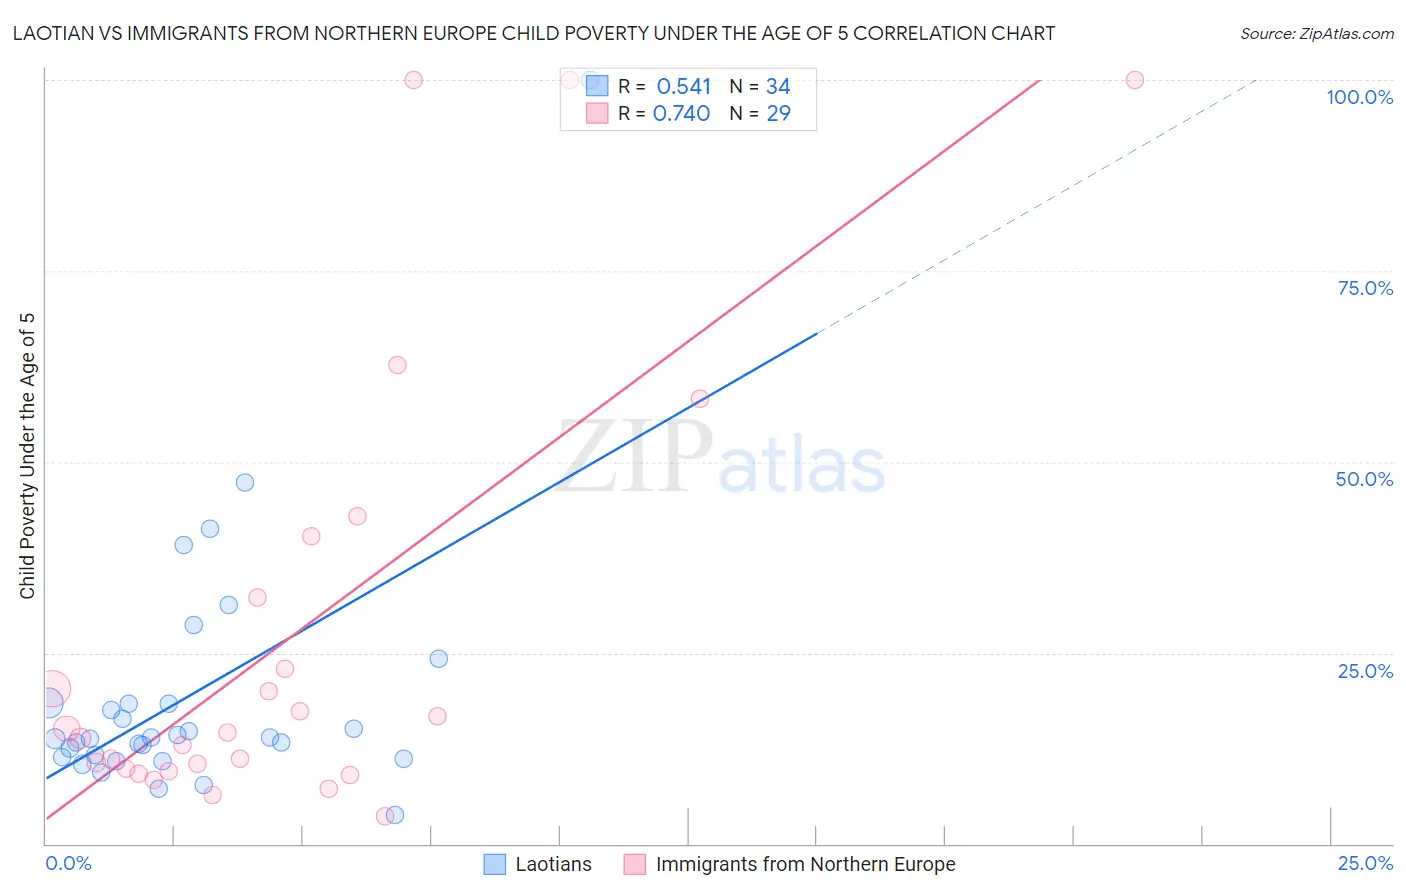 Laotian vs Immigrants from Northern Europe Child Poverty Under the Age of 5